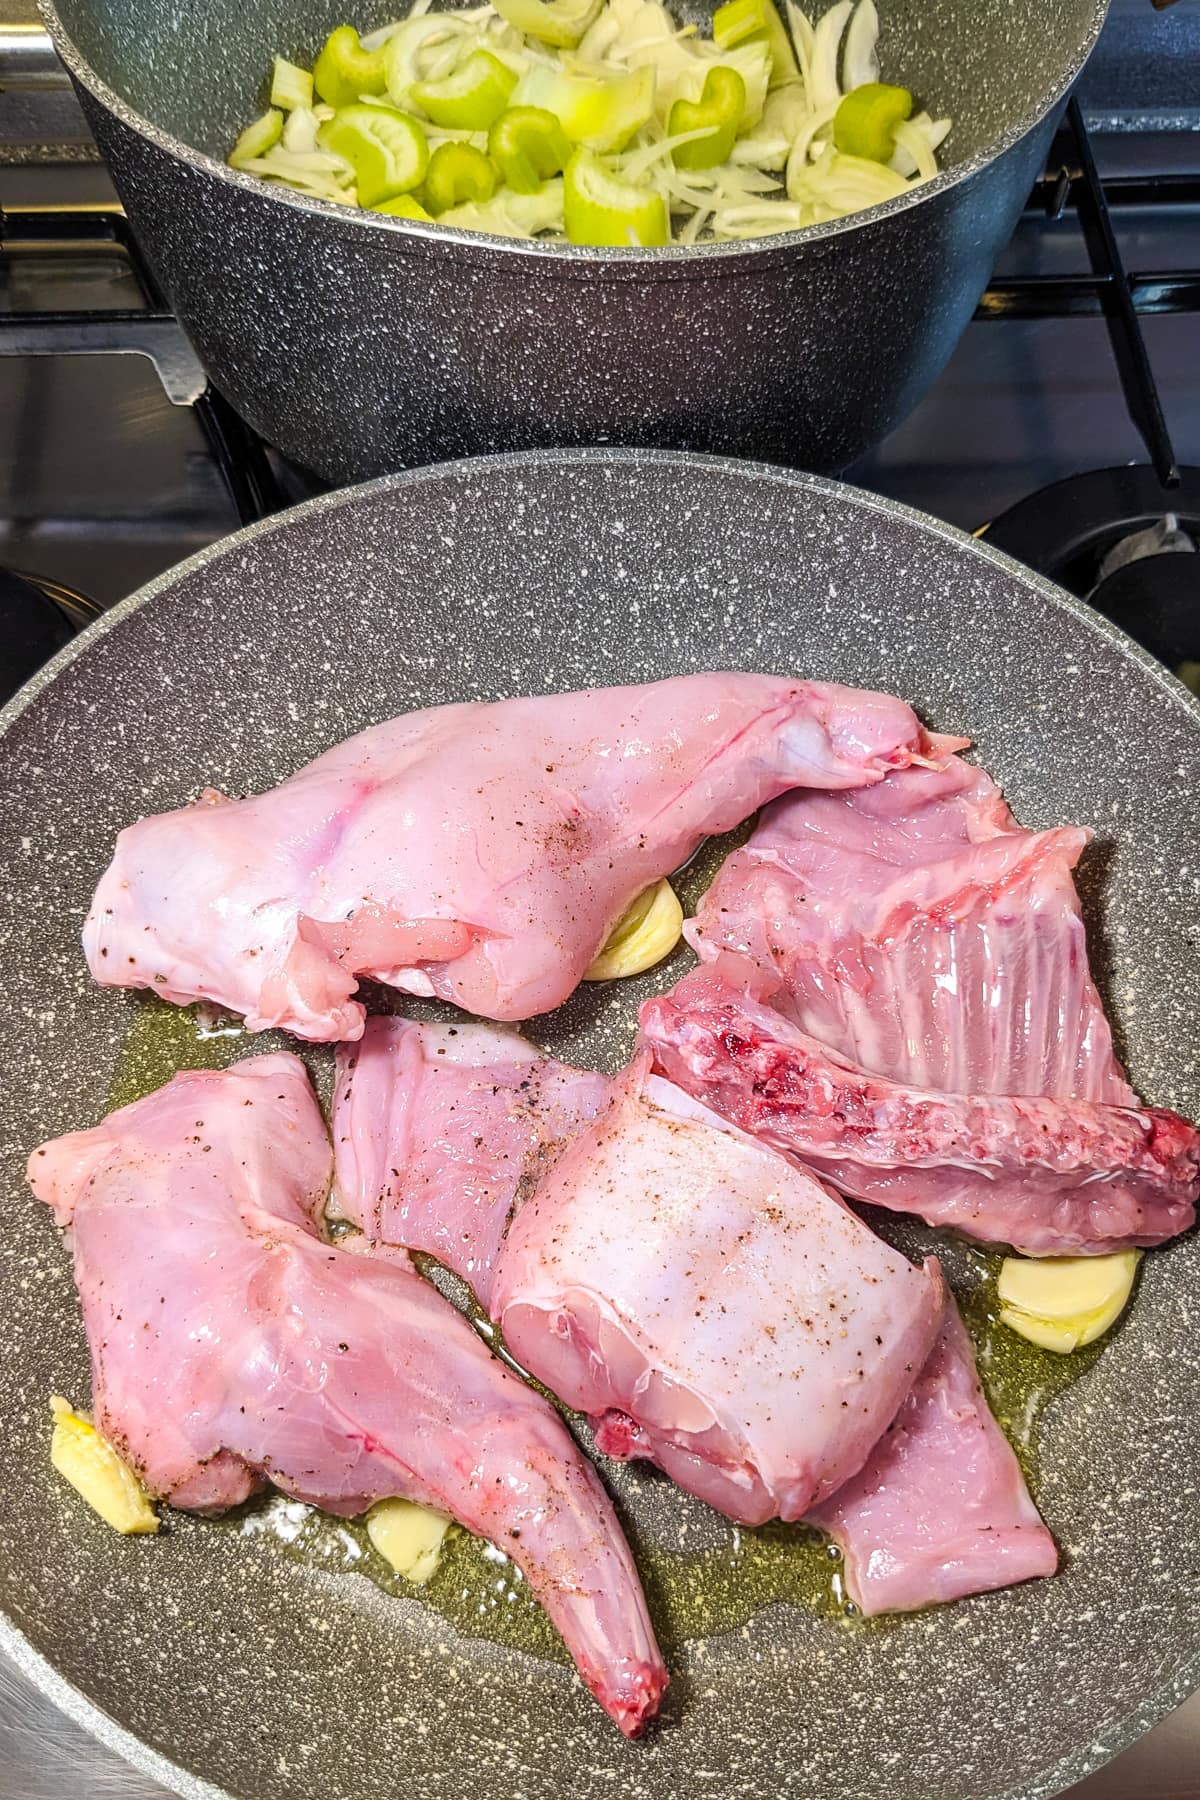 Frying rabbit meat in a garlicky olive oil on the stove.